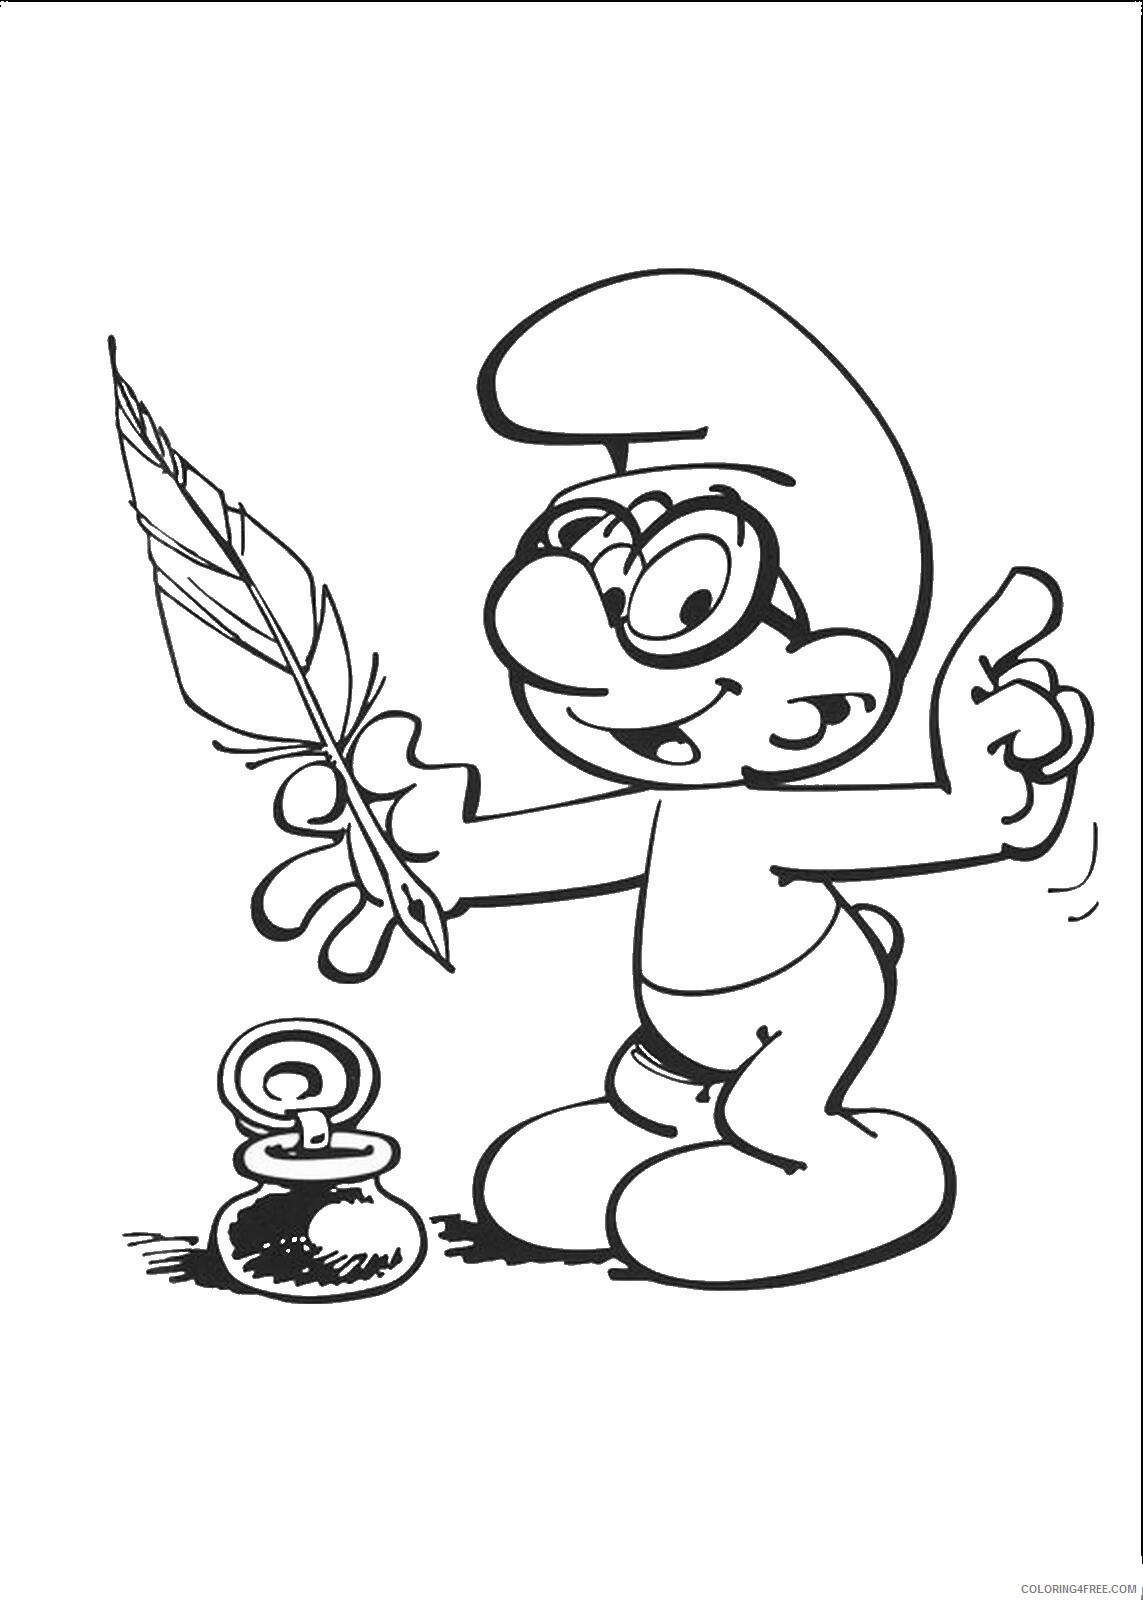 The Smurfs Coloring Pages TV Film smurfs_18 Printable 2020 09719 Coloring4free